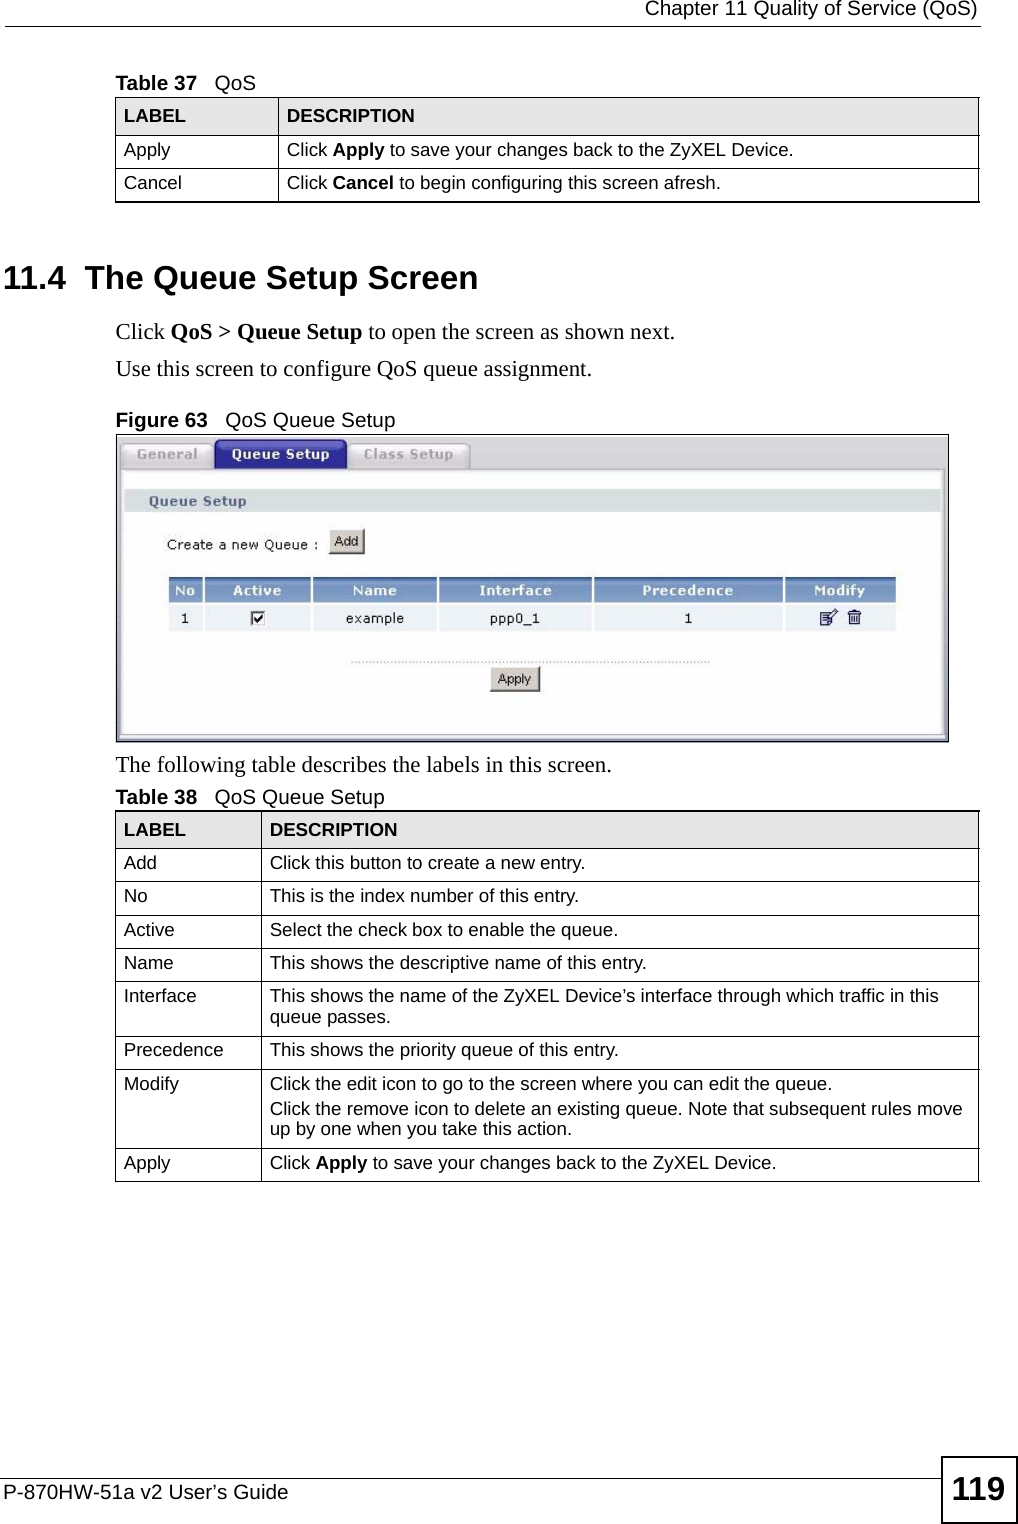  Chapter 11 Quality of Service (QoS)P-870HW-51a v2 User’s Guide 11911.4  The Queue Setup ScreenClick QoS &gt; Queue Setup to open the screen as shown next. Use this screen to configure QoS queue assignment. Figure 63   QoS Queue Setup The following table describes the labels in this screen. Apply Click Apply to save your changes back to the ZyXEL Device.Cancel Click Cancel to begin configuring this screen afresh.Table 37   QoSLABEL DESCRIPTIONTable 38   QoS Queue SetupLABEL DESCRIPTIONAdd Click this button to create a new entry.No This is the index number of this entry.Active Select the check box to enable the queue.Name This shows the descriptive name of this entry.Interface This shows the name of the ZyXEL Device’s interface through which traffic in this queue passes.Precedence This shows the priority queue of this entry.Modify Click the edit icon to go to the screen where you can edit the queue.Click the remove icon to delete an existing queue. Note that subsequent rules move up by one when you take this action.Apply Click Apply to save your changes back to the ZyXEL Device.